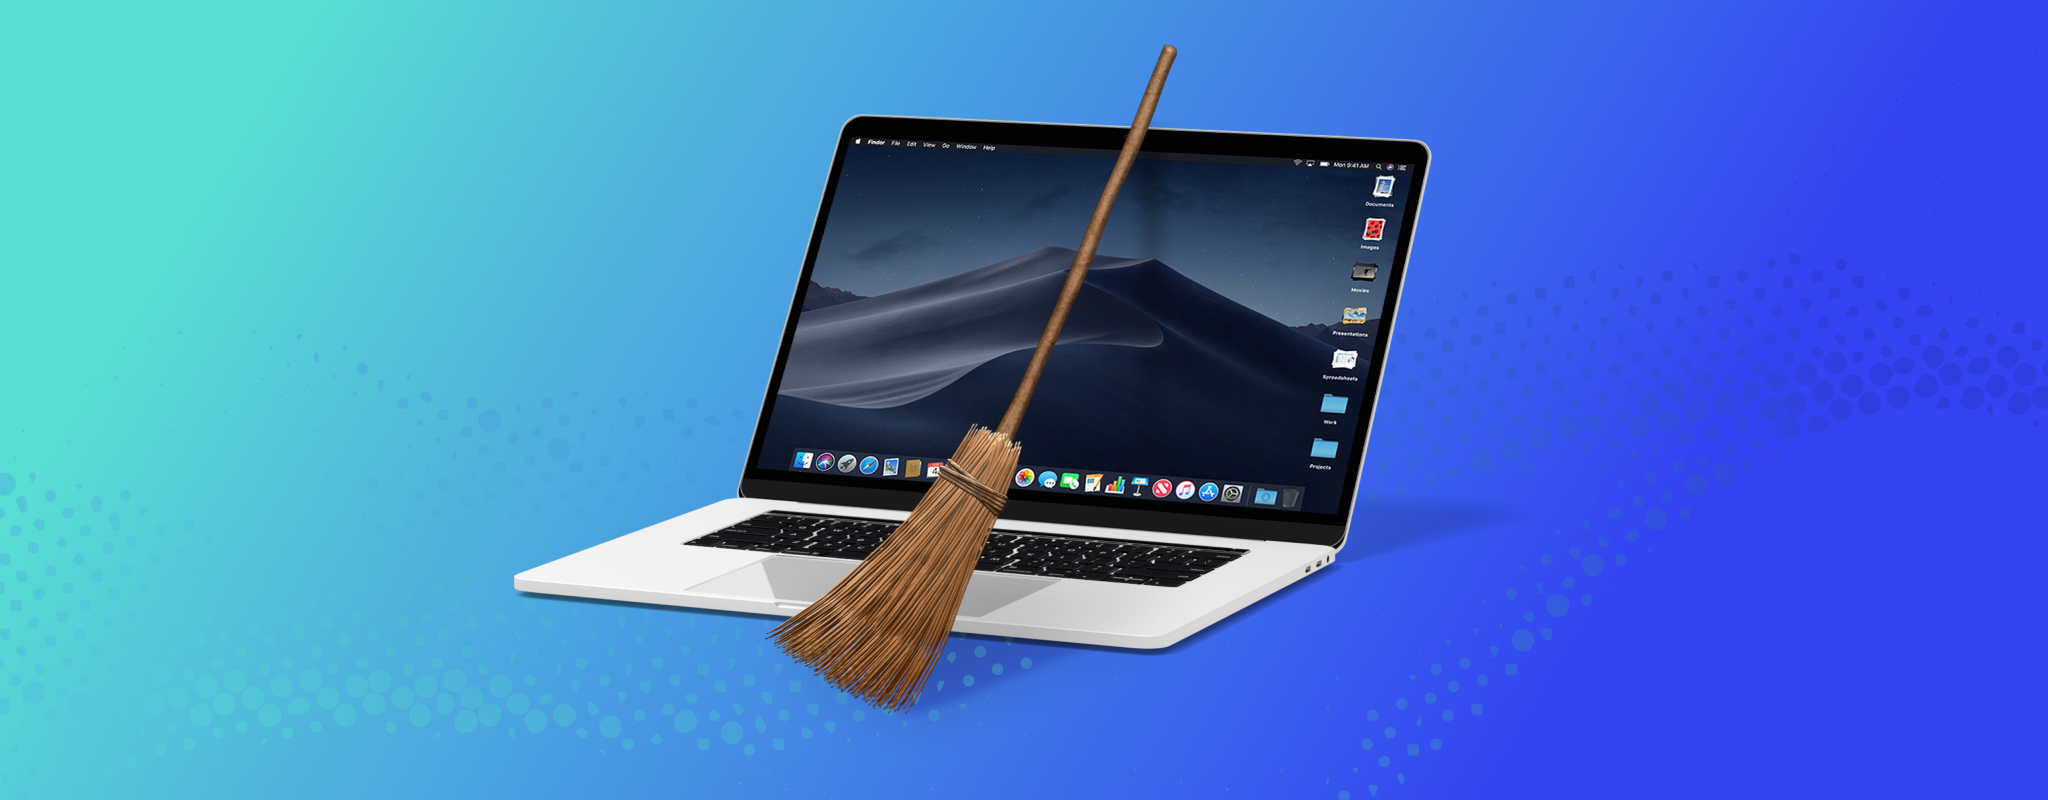 clean my mac for free